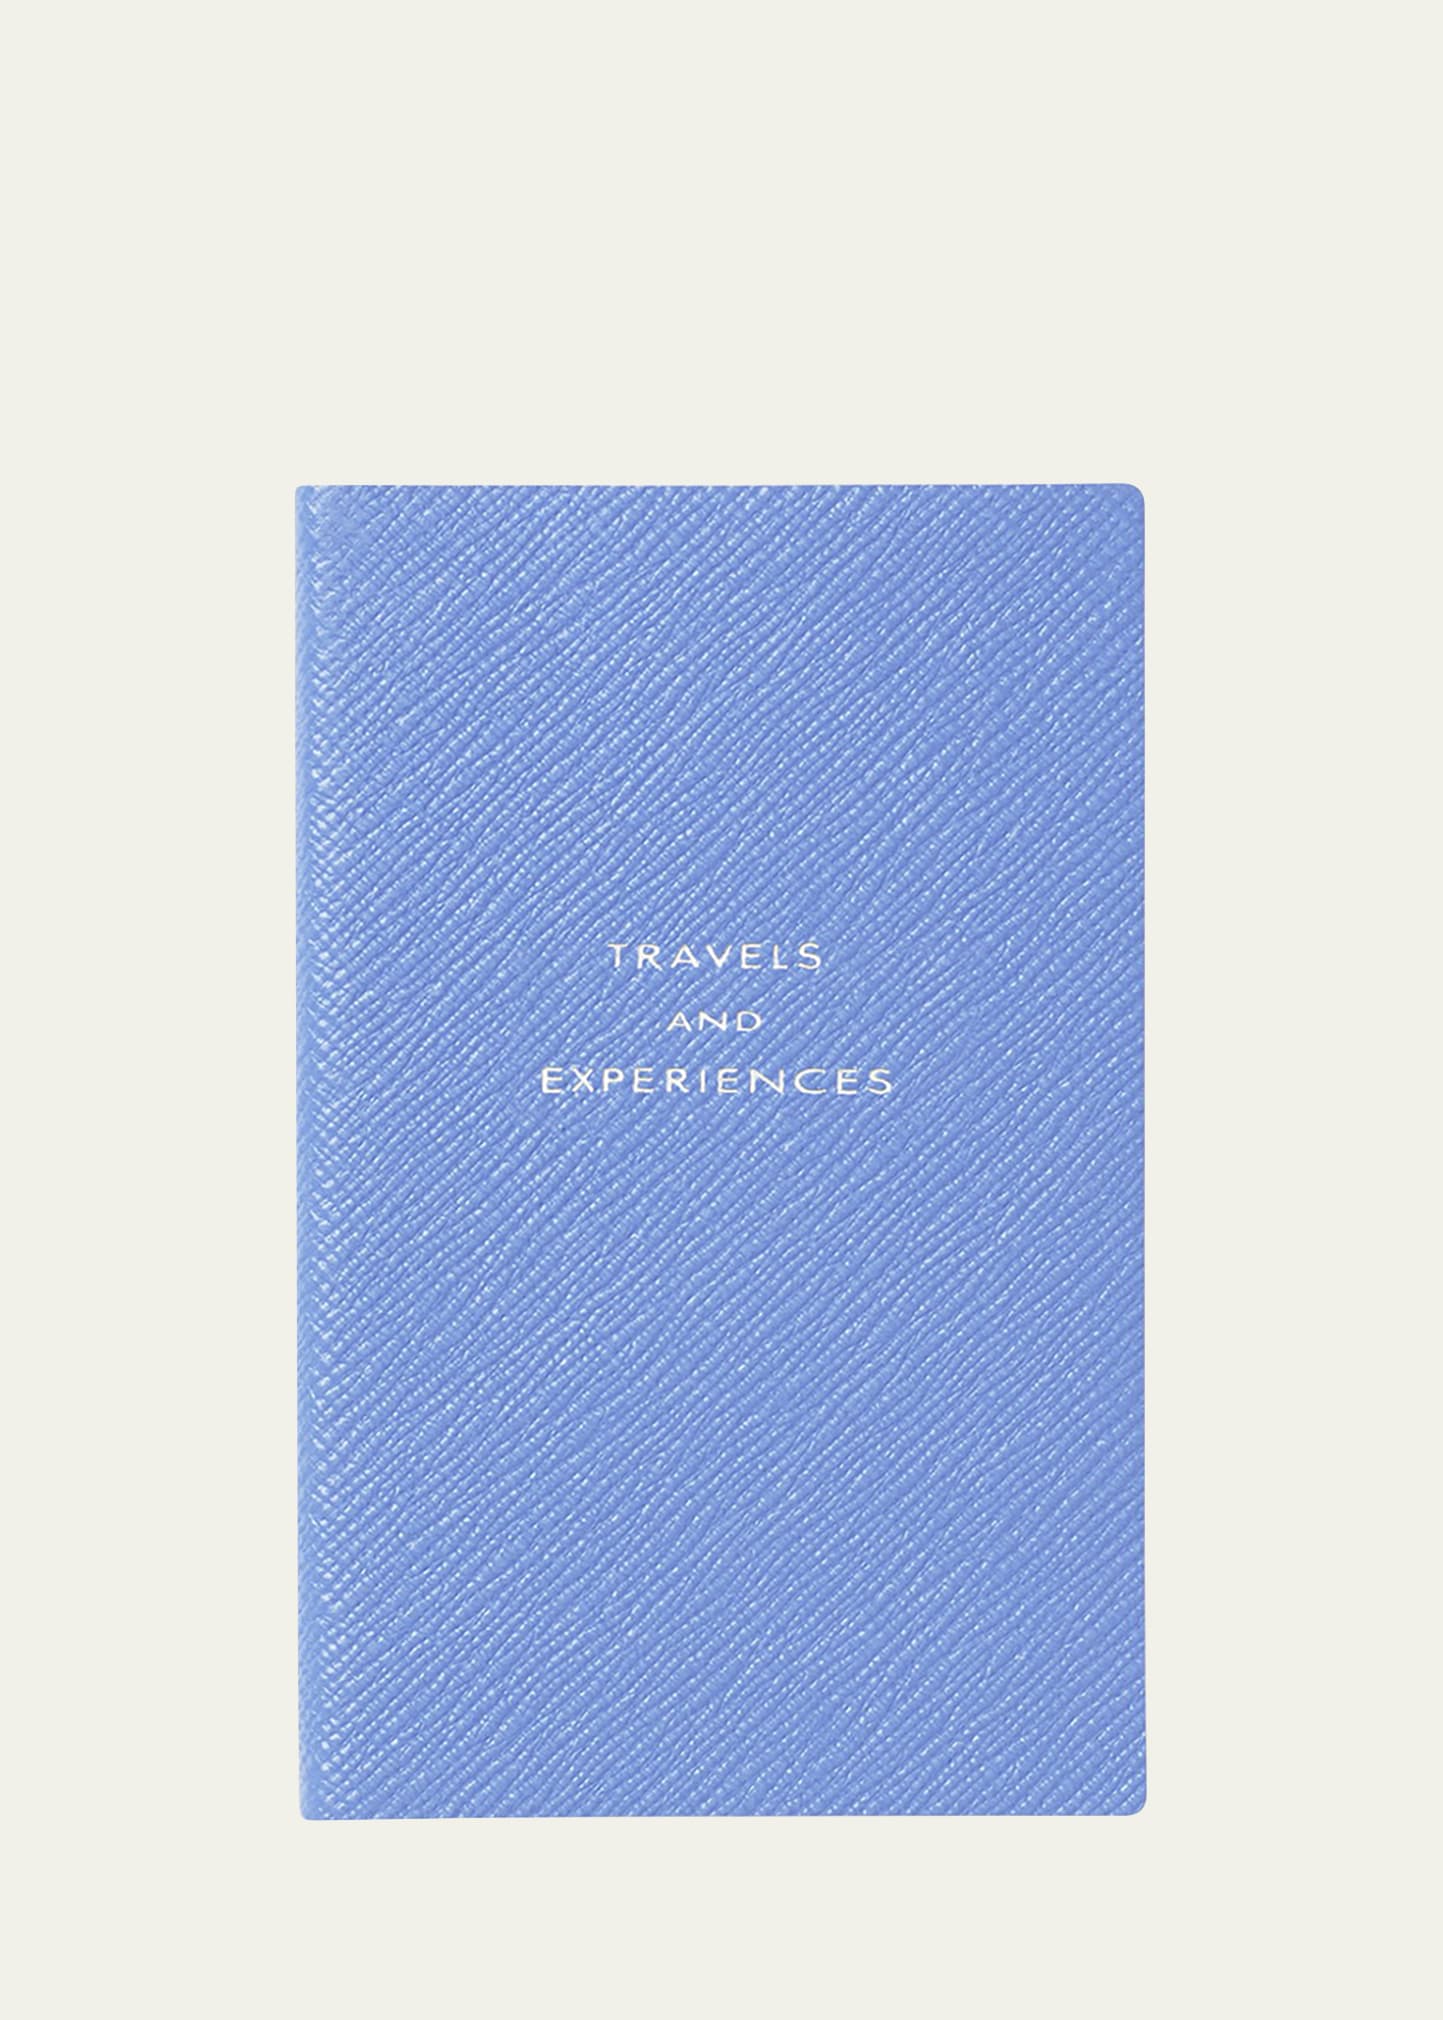 Smythson Travels And Experiences Panama Notebook In Nile Blue